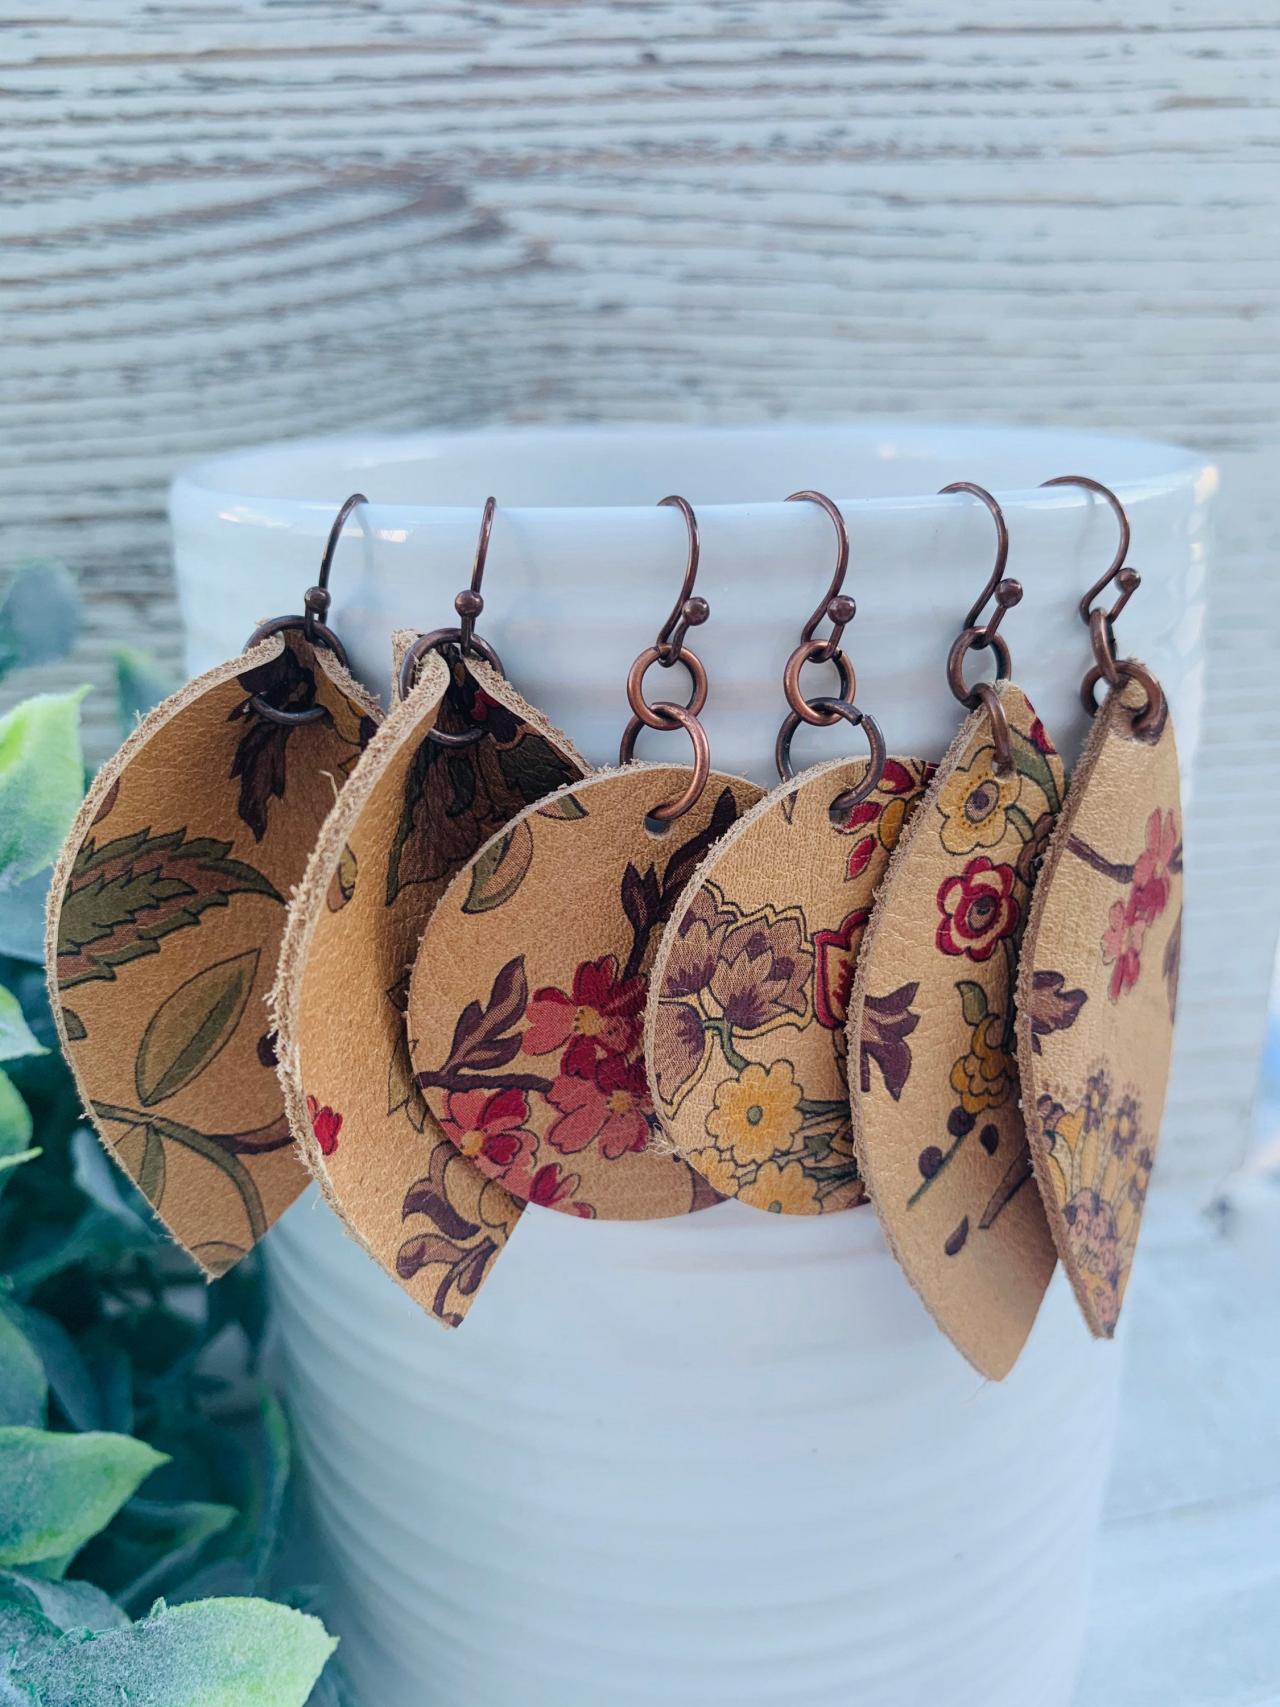 Cute Leather Earrings | Floral Leather Earrings | Leather Earrings Teardrop | Flower Leather Earrings | Genuine Leather